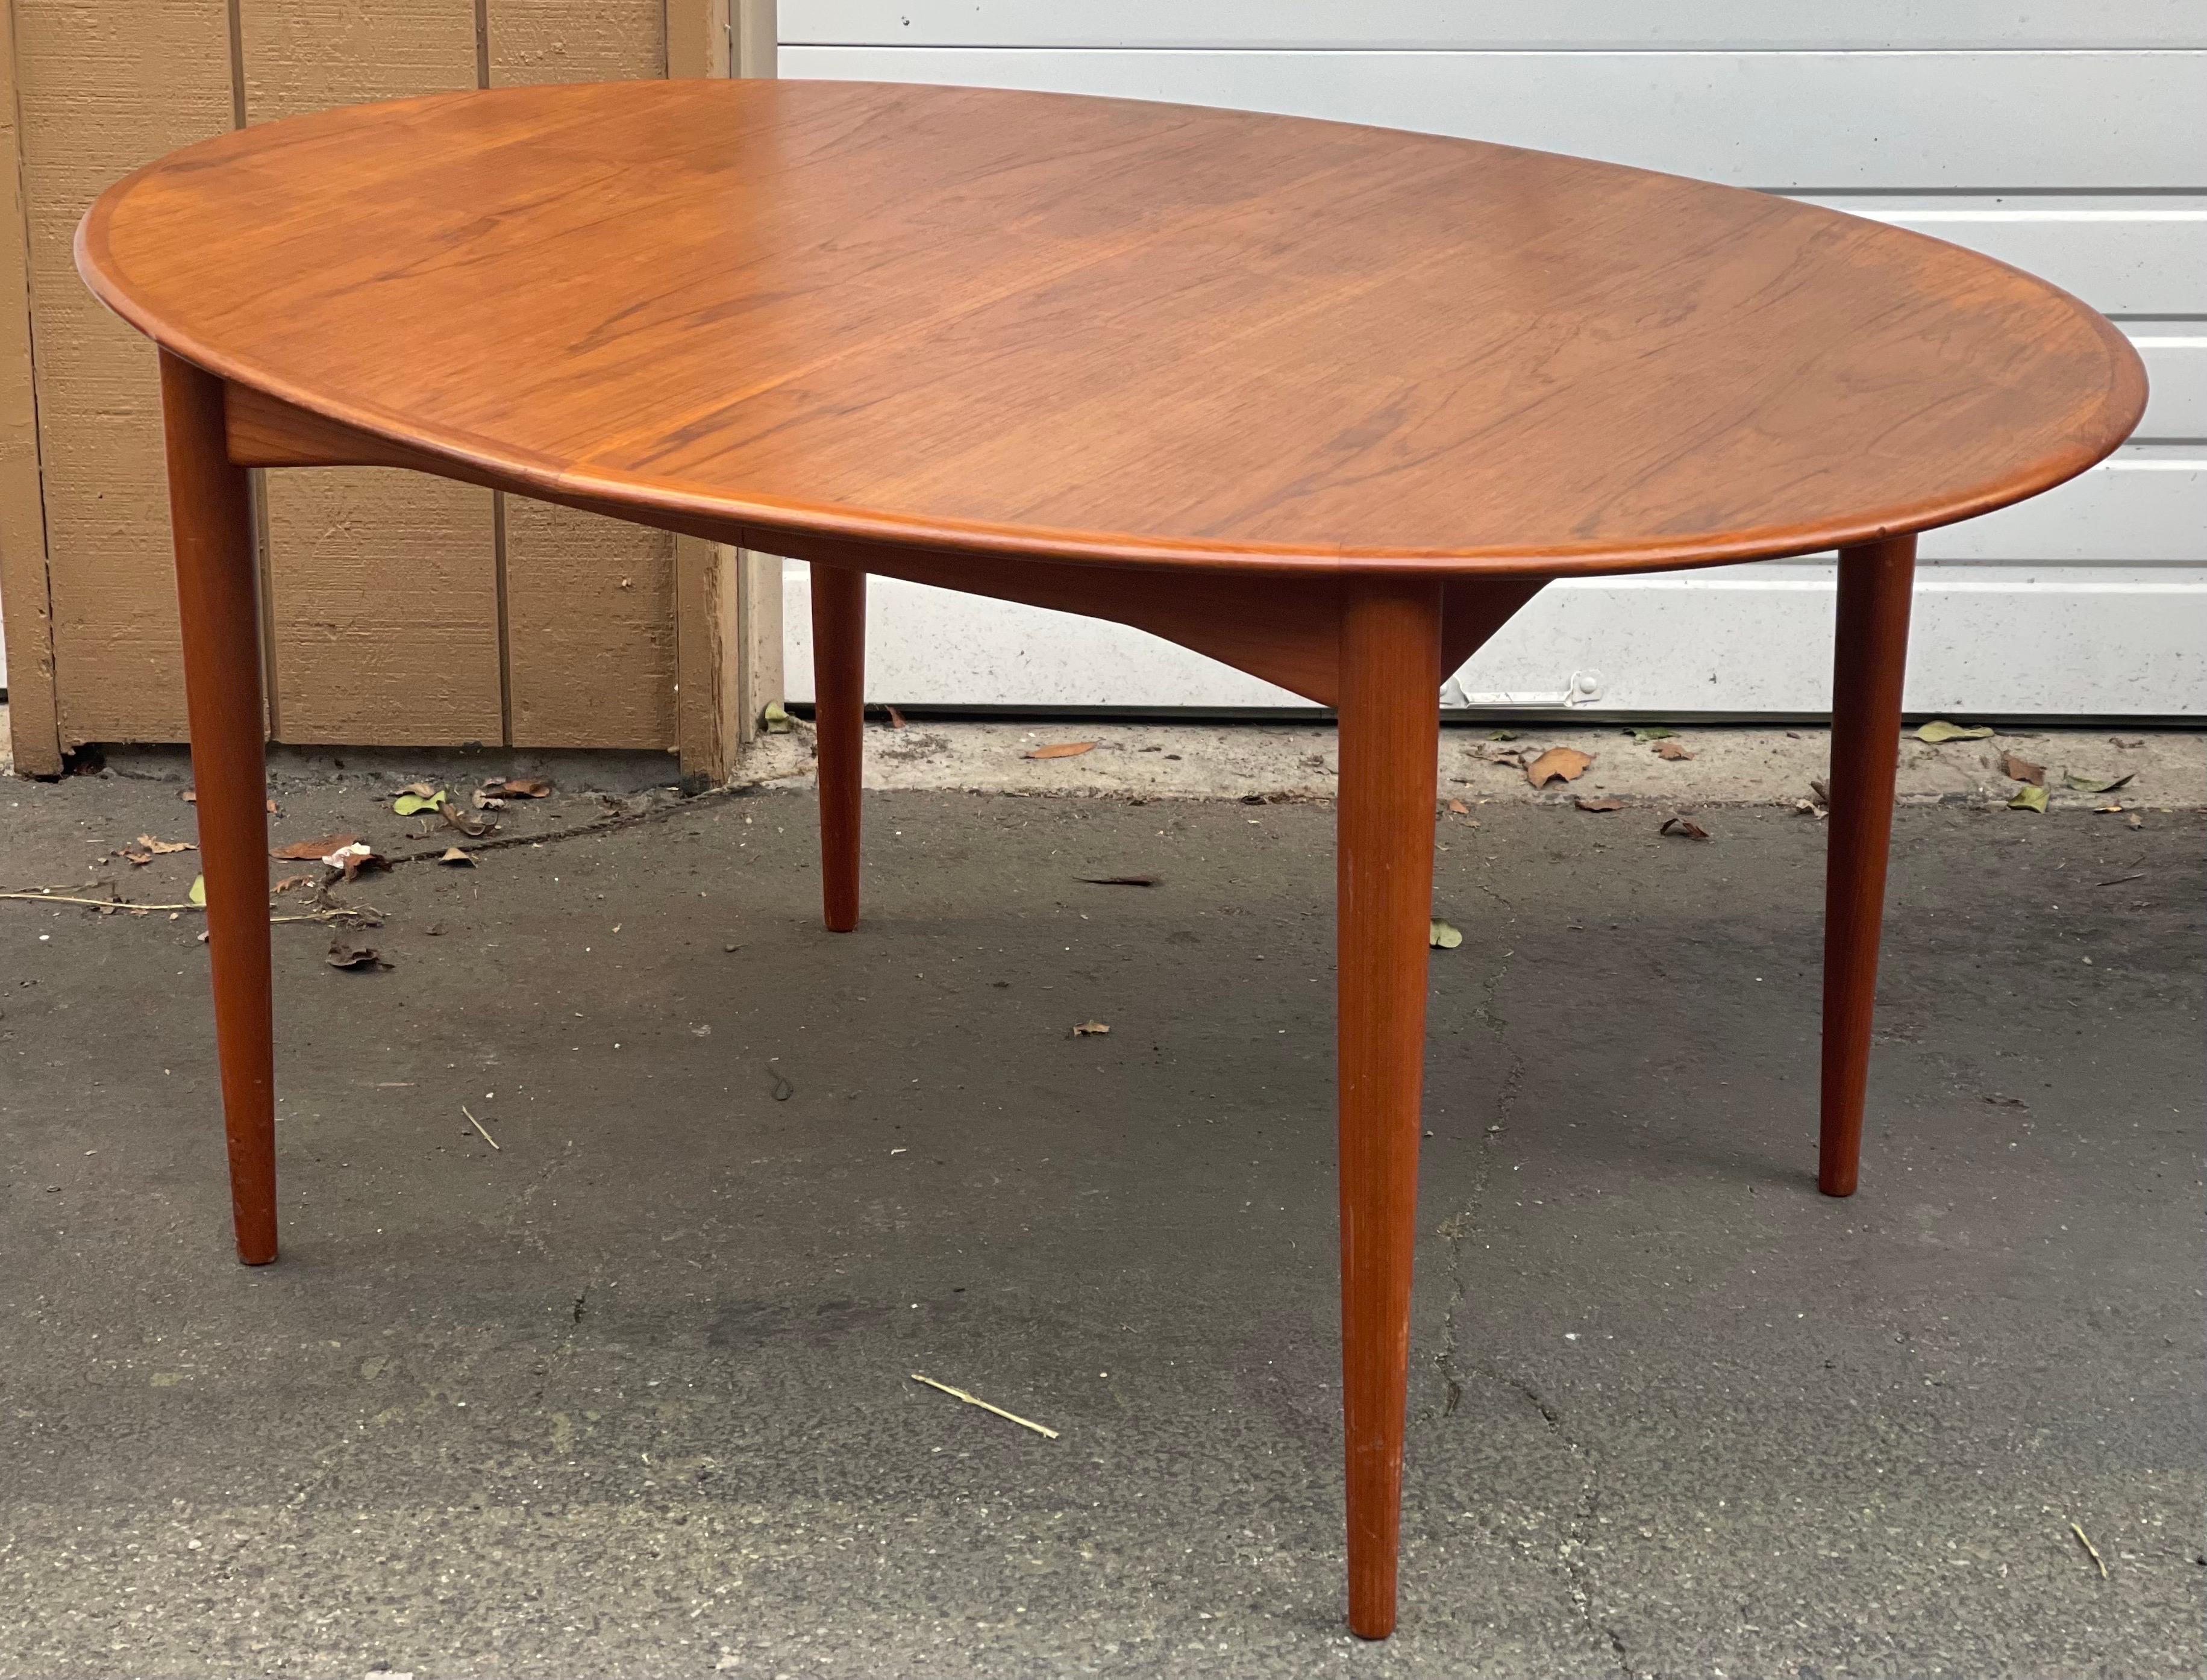 (Available by Online Purchase Only)

Vintage Mid Century Modern Dining Table. UK Import
( No Leaf )
Dimensions. 56 1/2 W ; 41 1/2 D ; 28 H